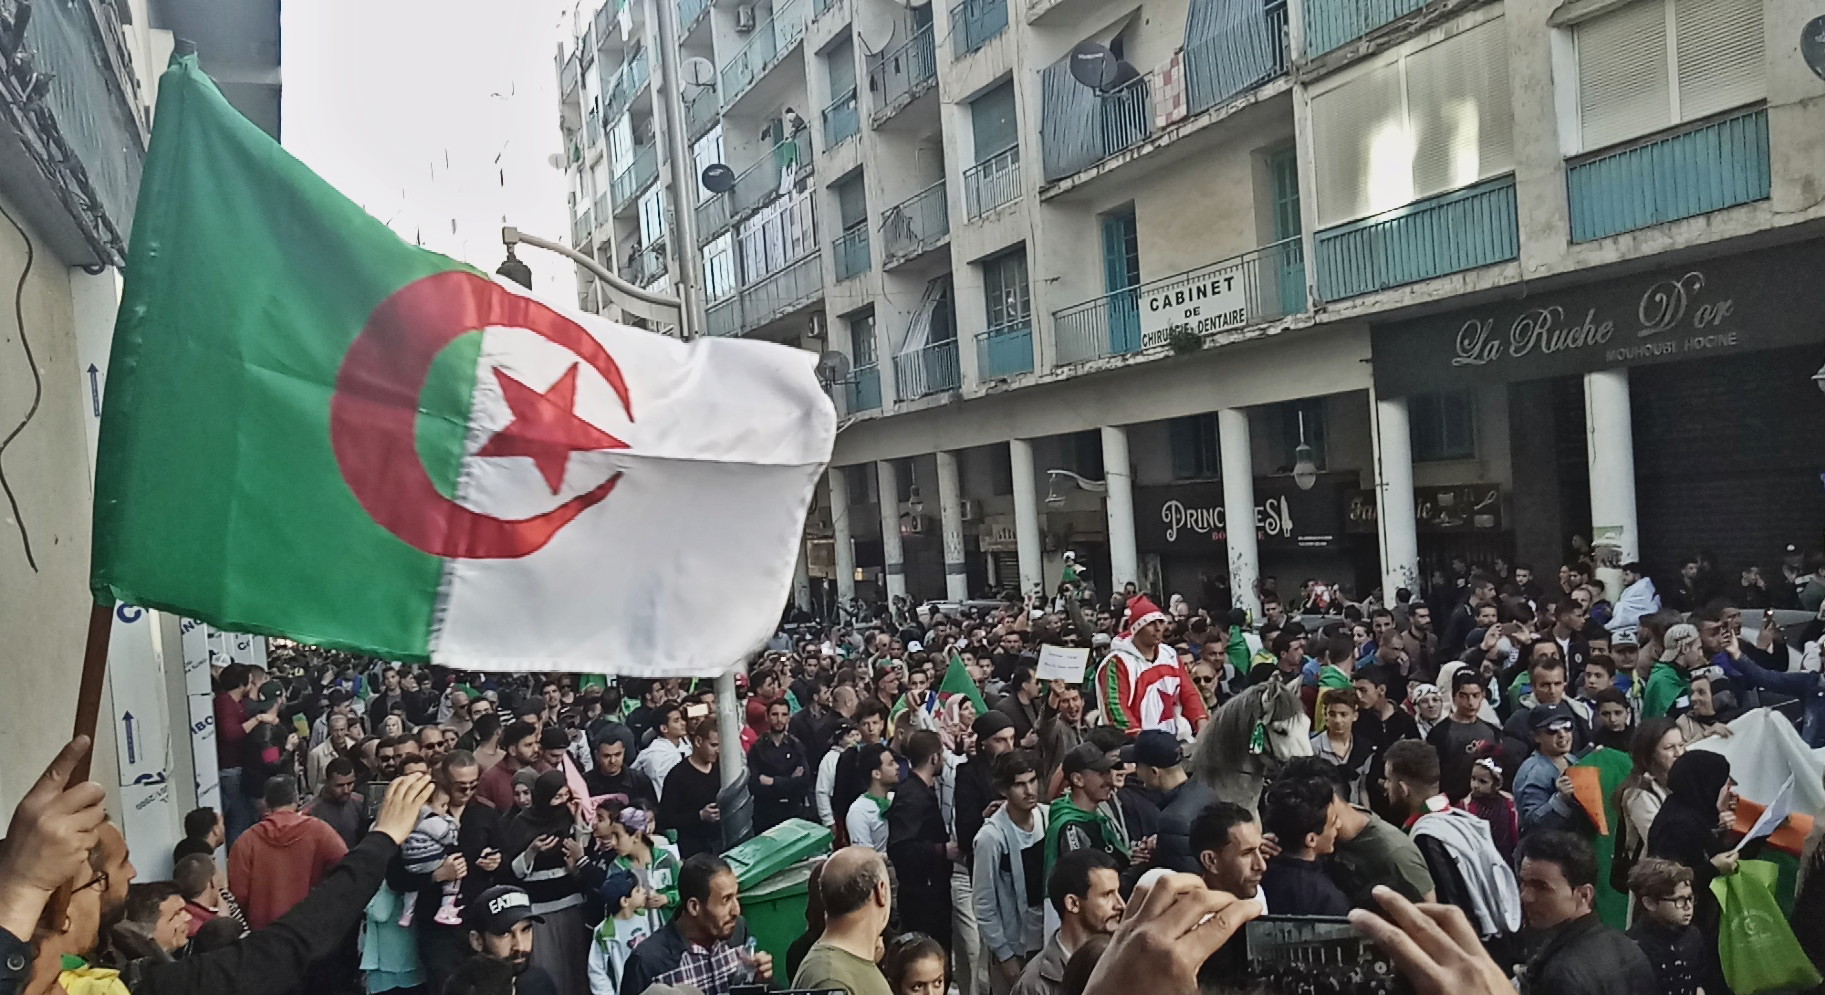 What Could the Hirak Movement Mean for Religious Freedom in Algeria?